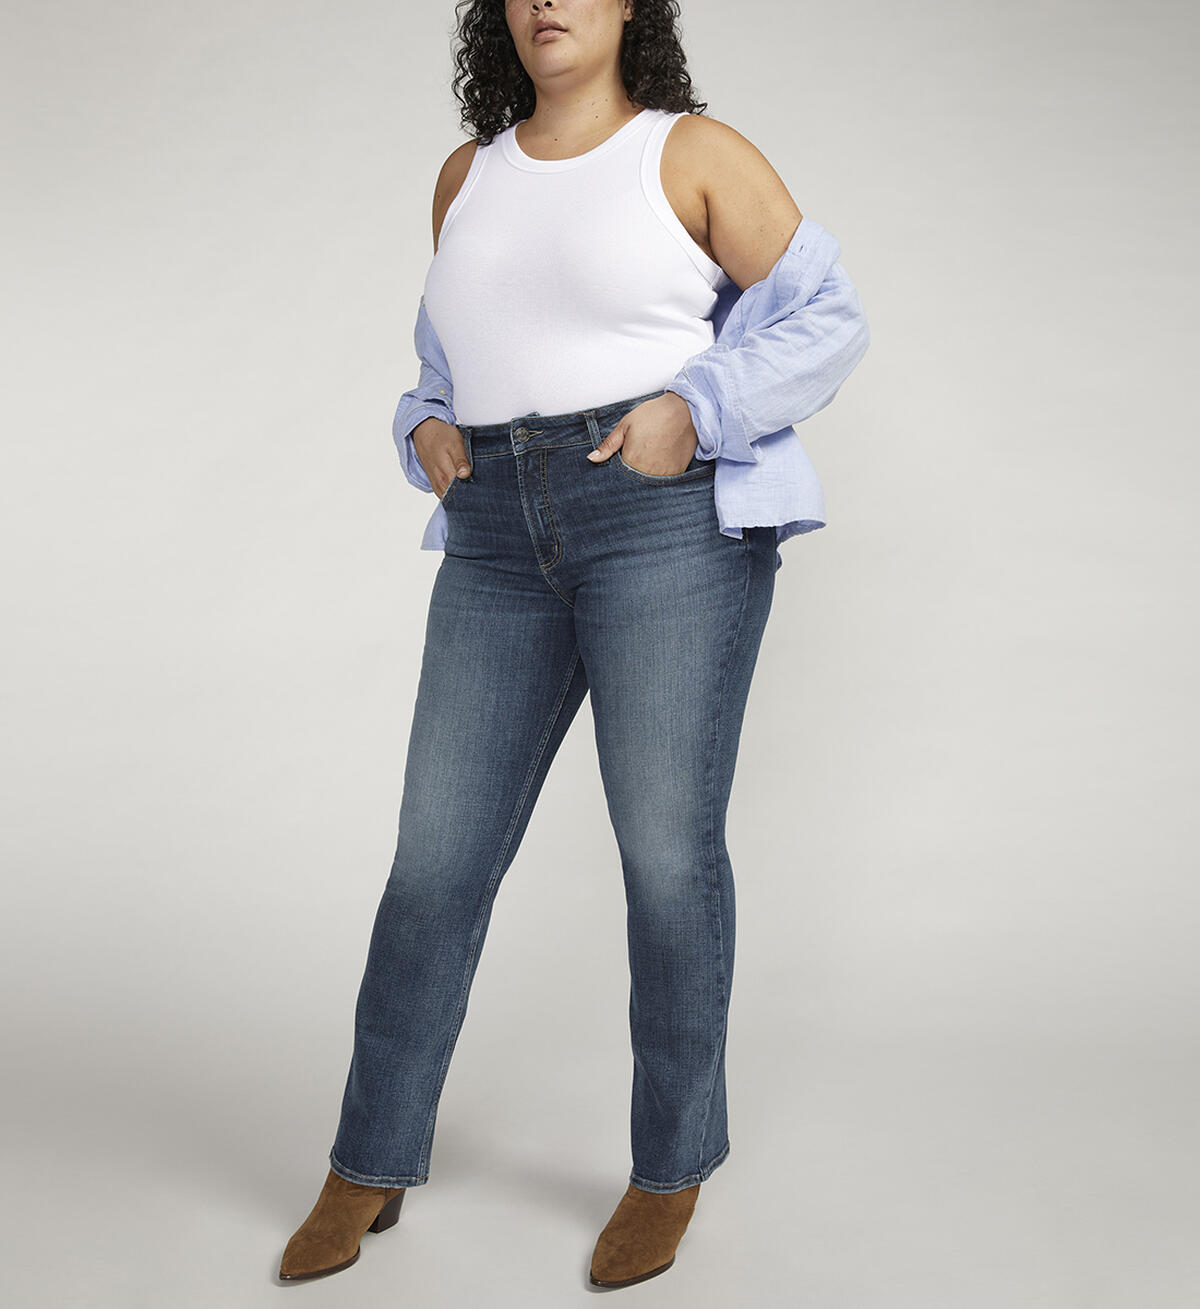 Avery High Rise Slim Bootcut Jeans Plus Size, , hi-res image number 4